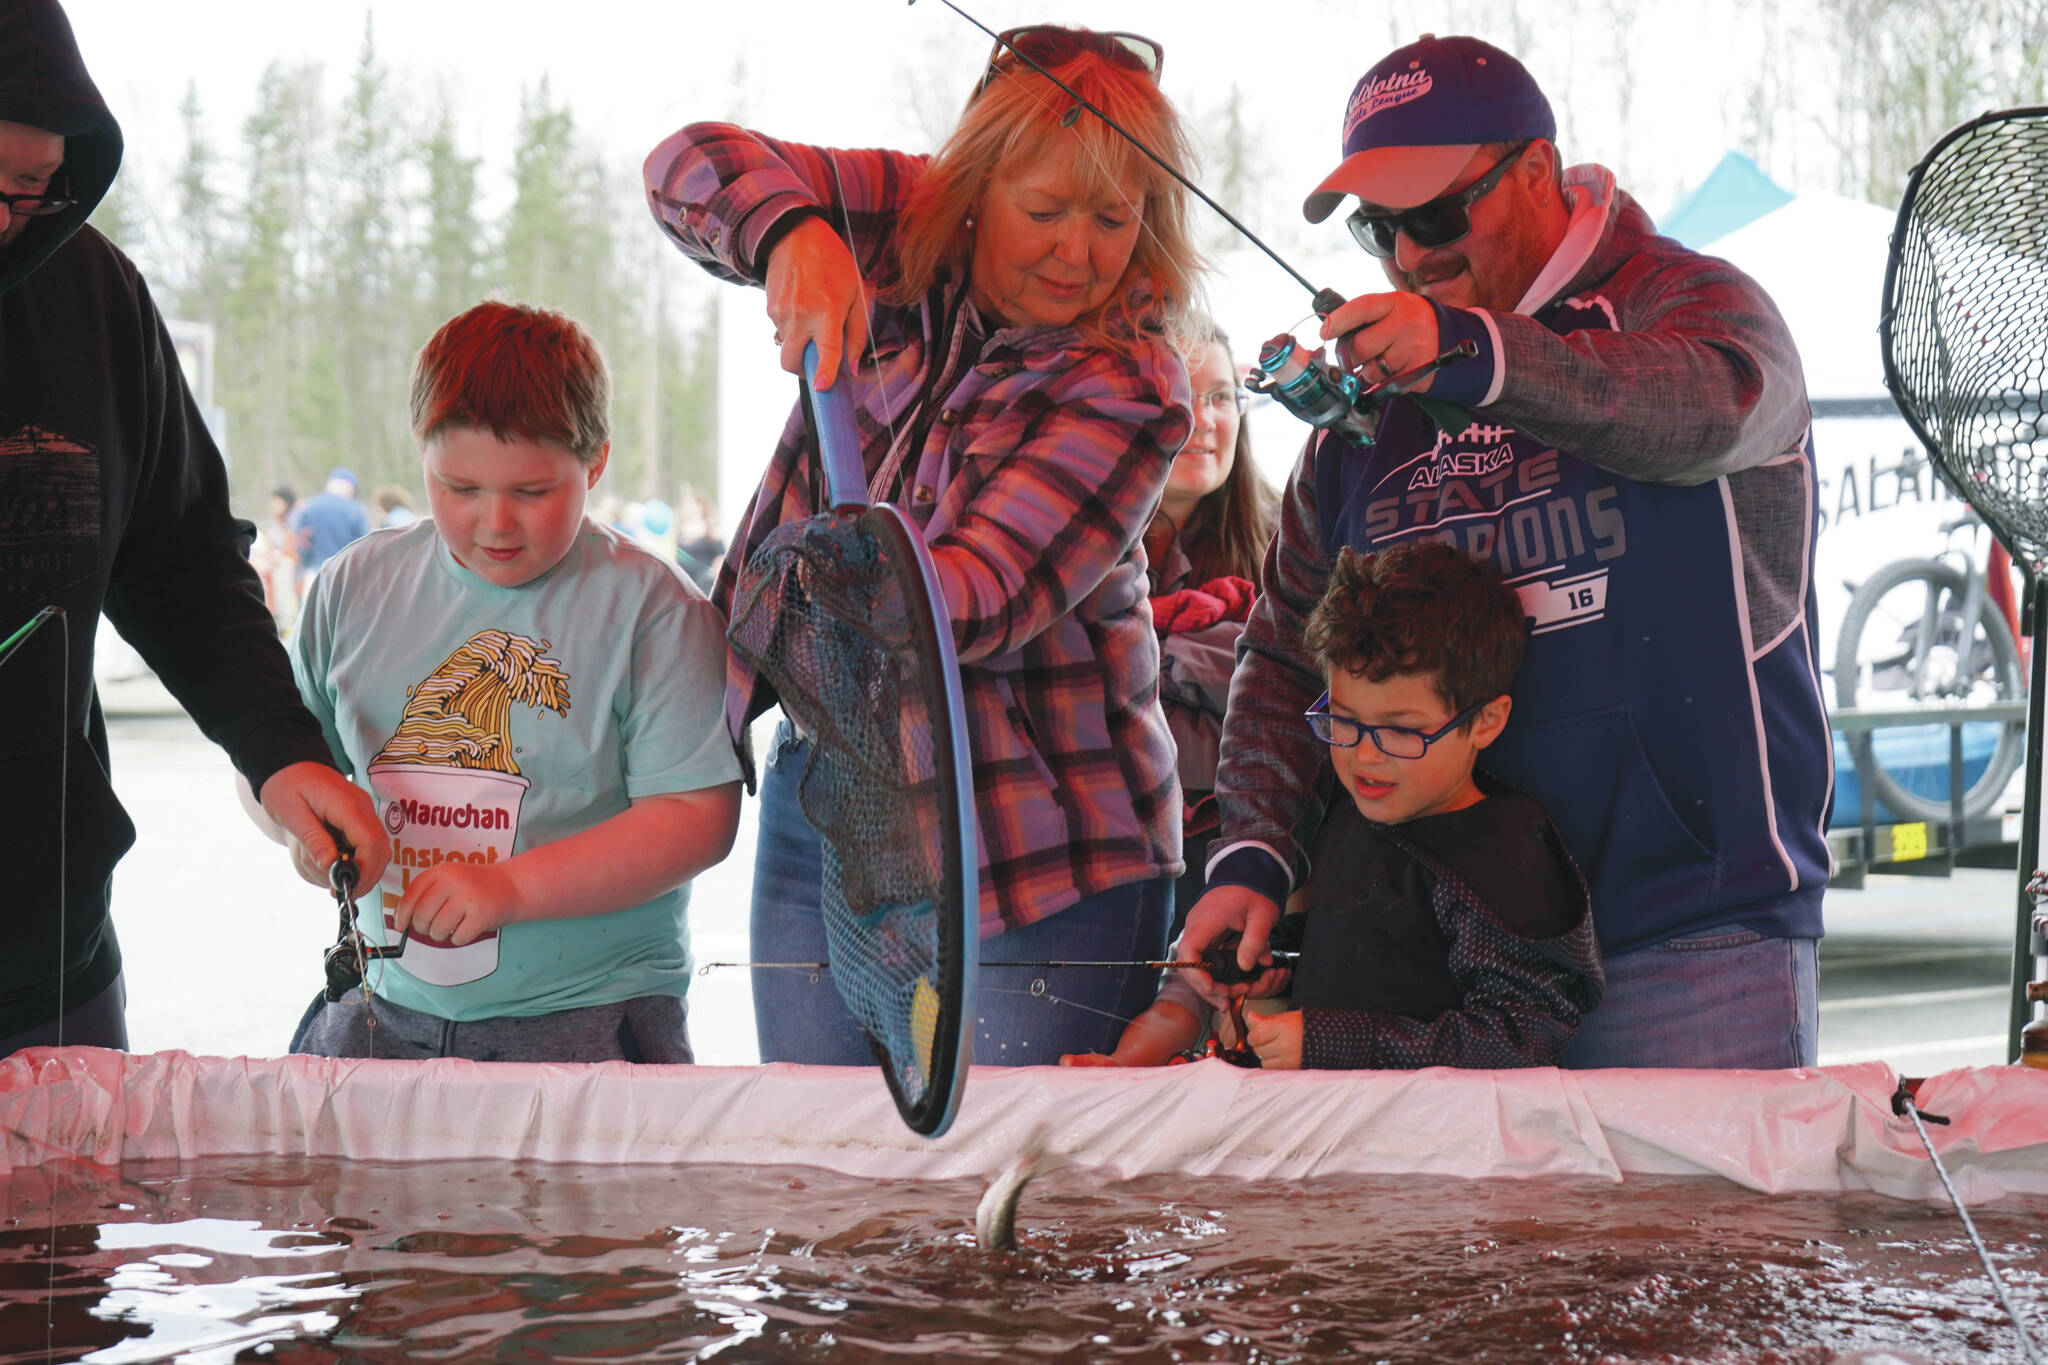 Jake Dye/Peninsula Clarion
A rainbow trout is lifted into a net during the Sport, Rec and Trade Show at the Soldotna Regional Sports Complex on Saturday.